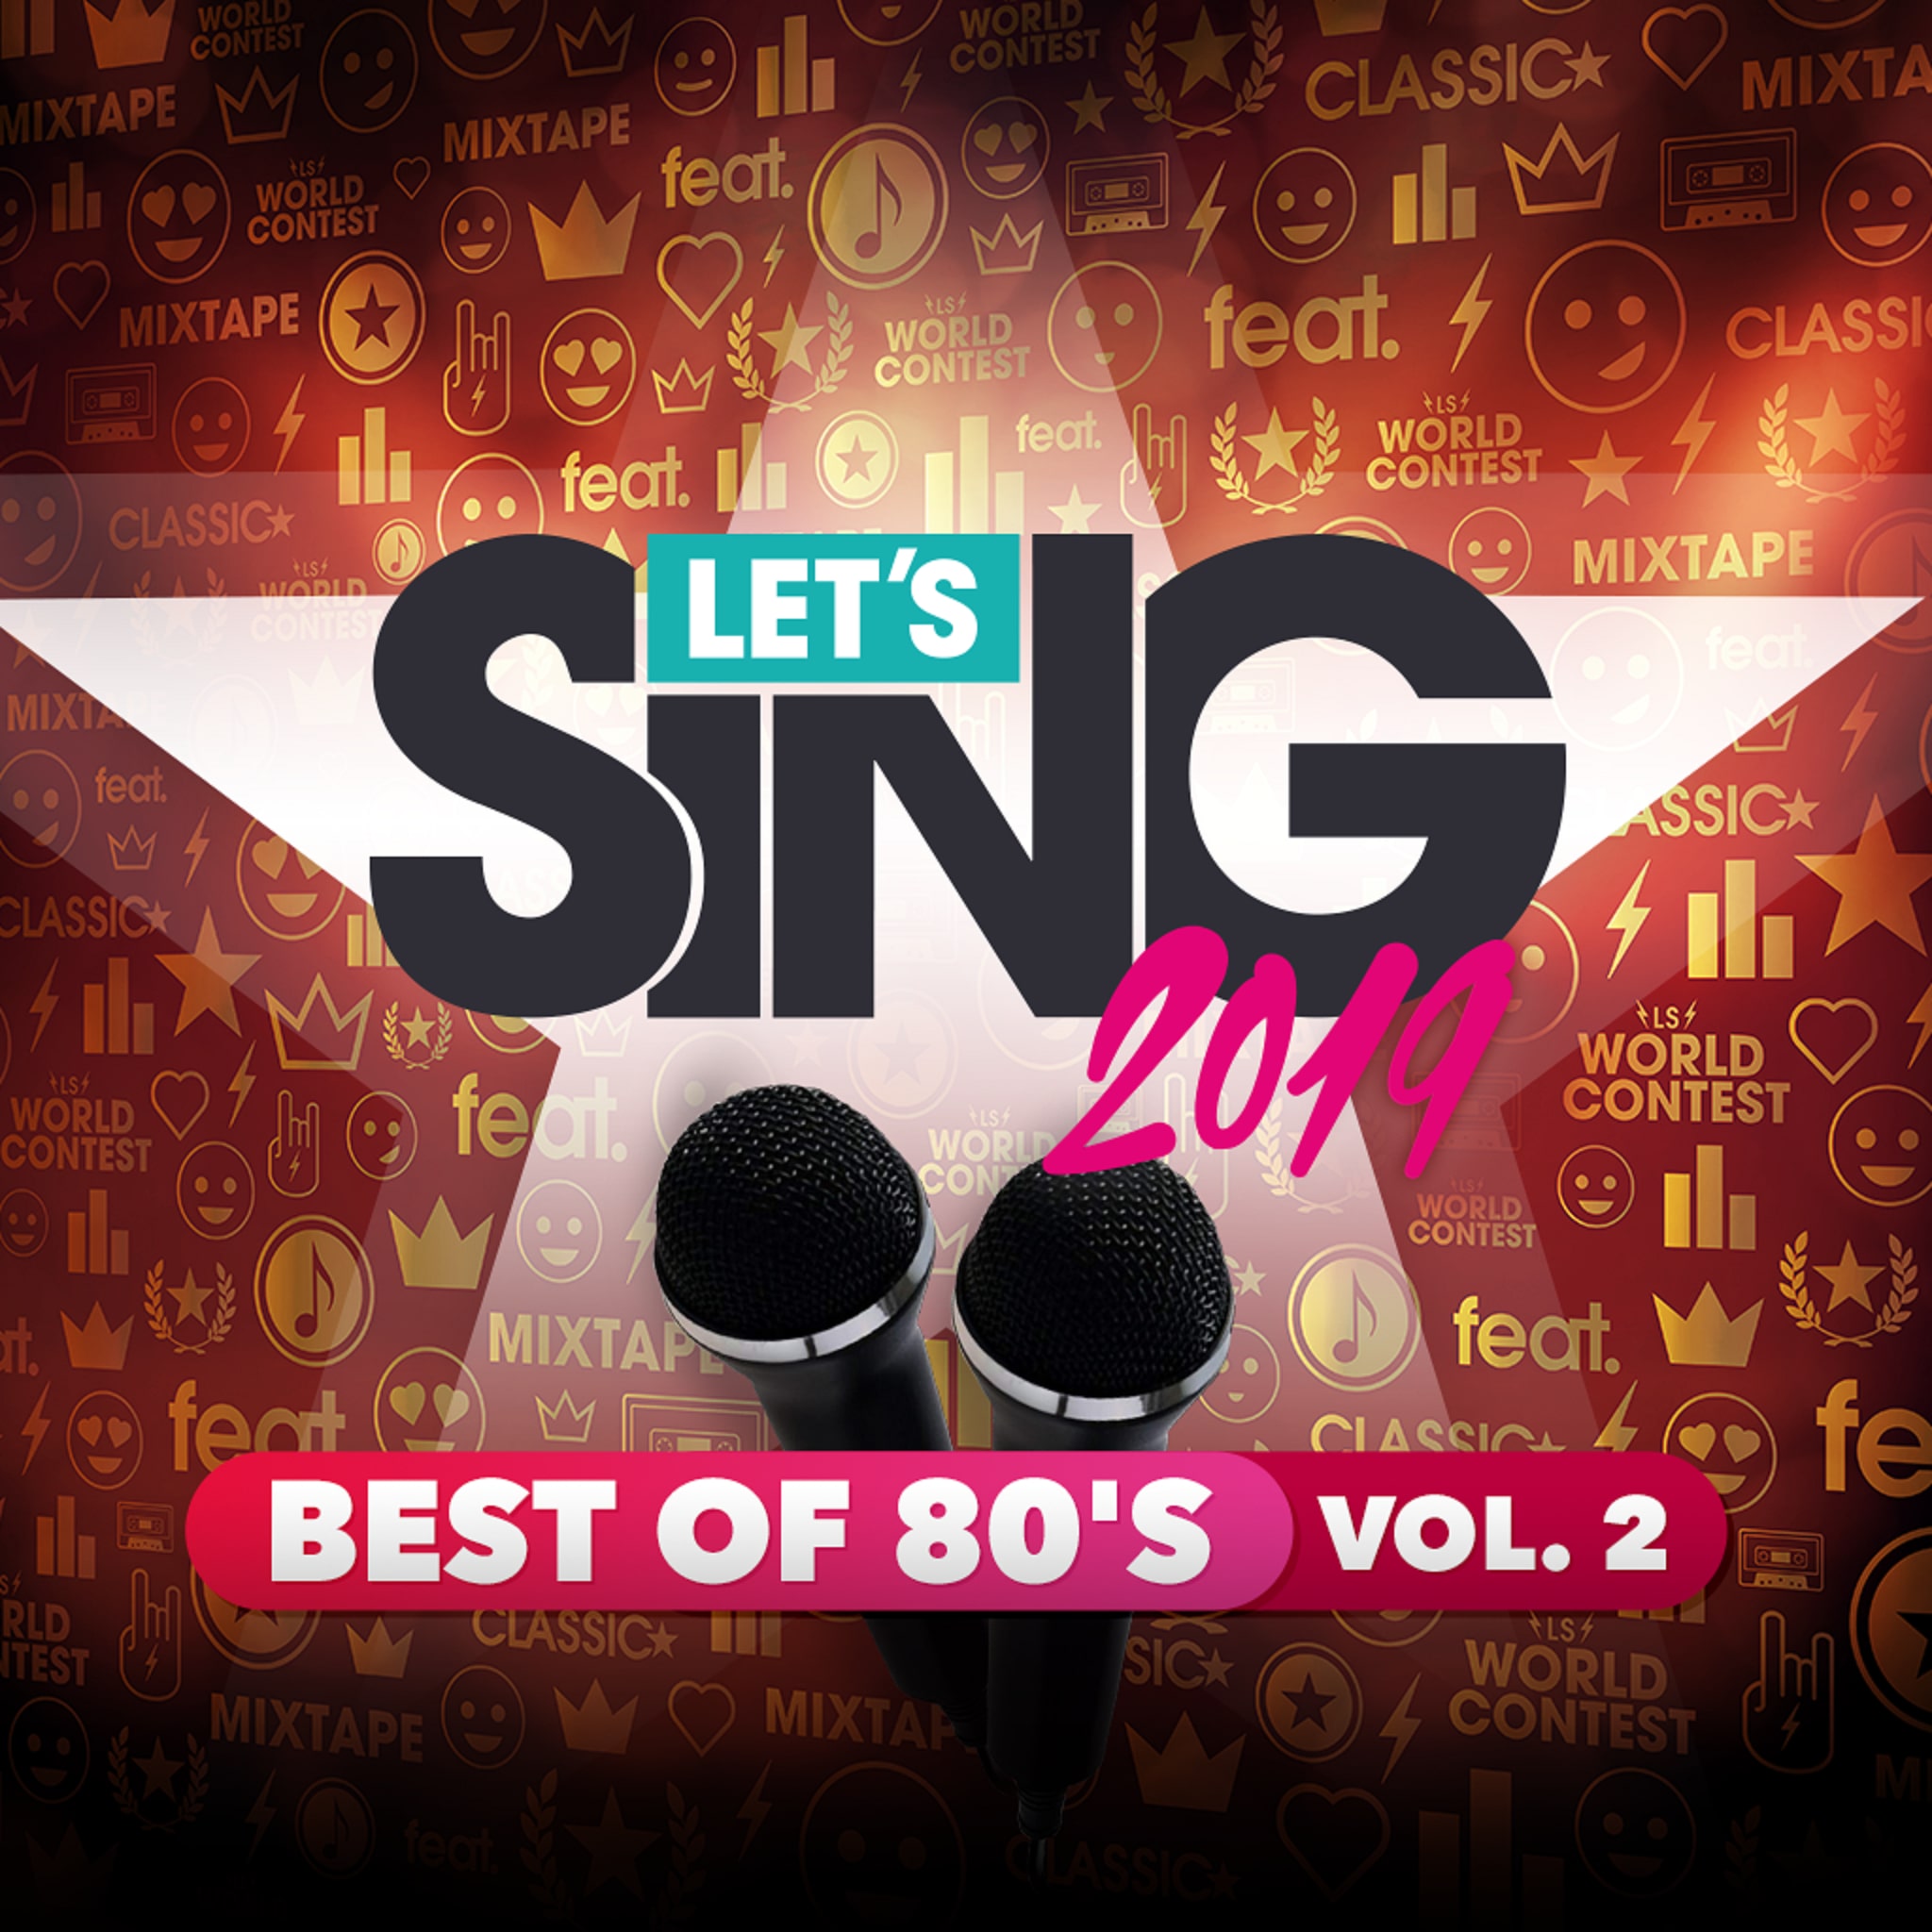 Let's Sing 2019 - Best of 80's Vol. 2 Song Pack